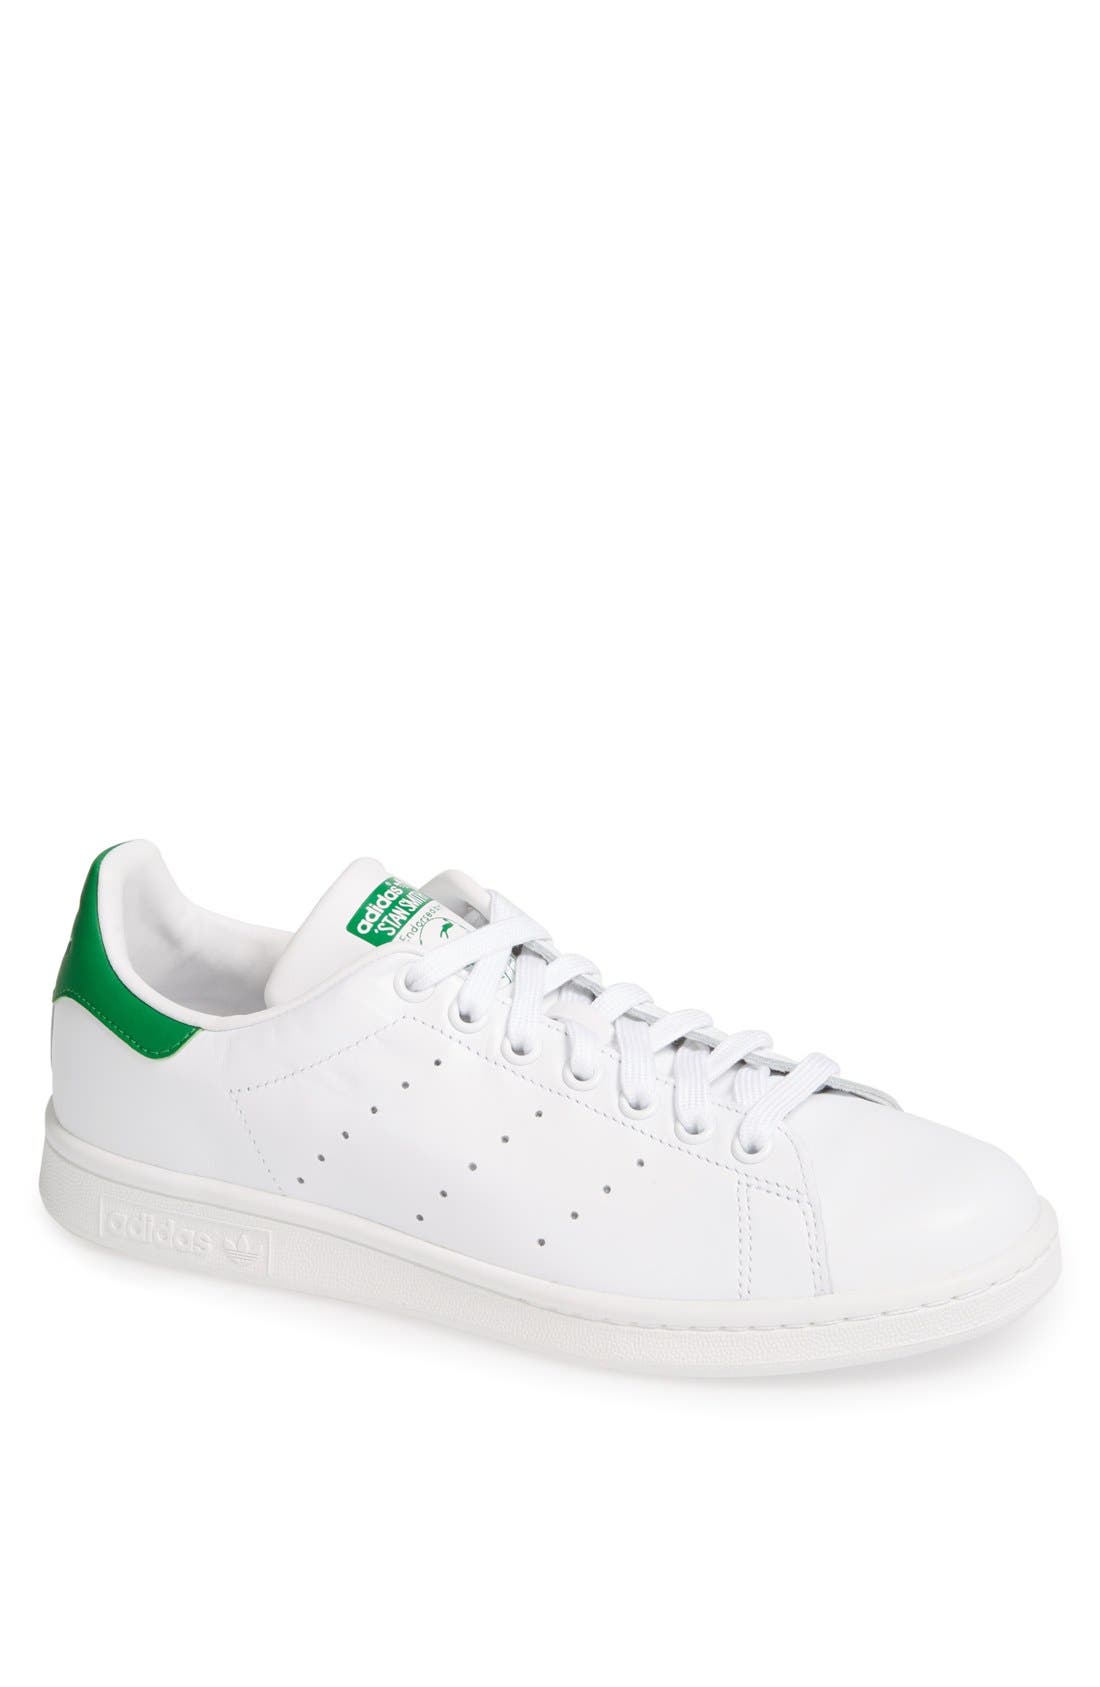 stan smith shoes buy